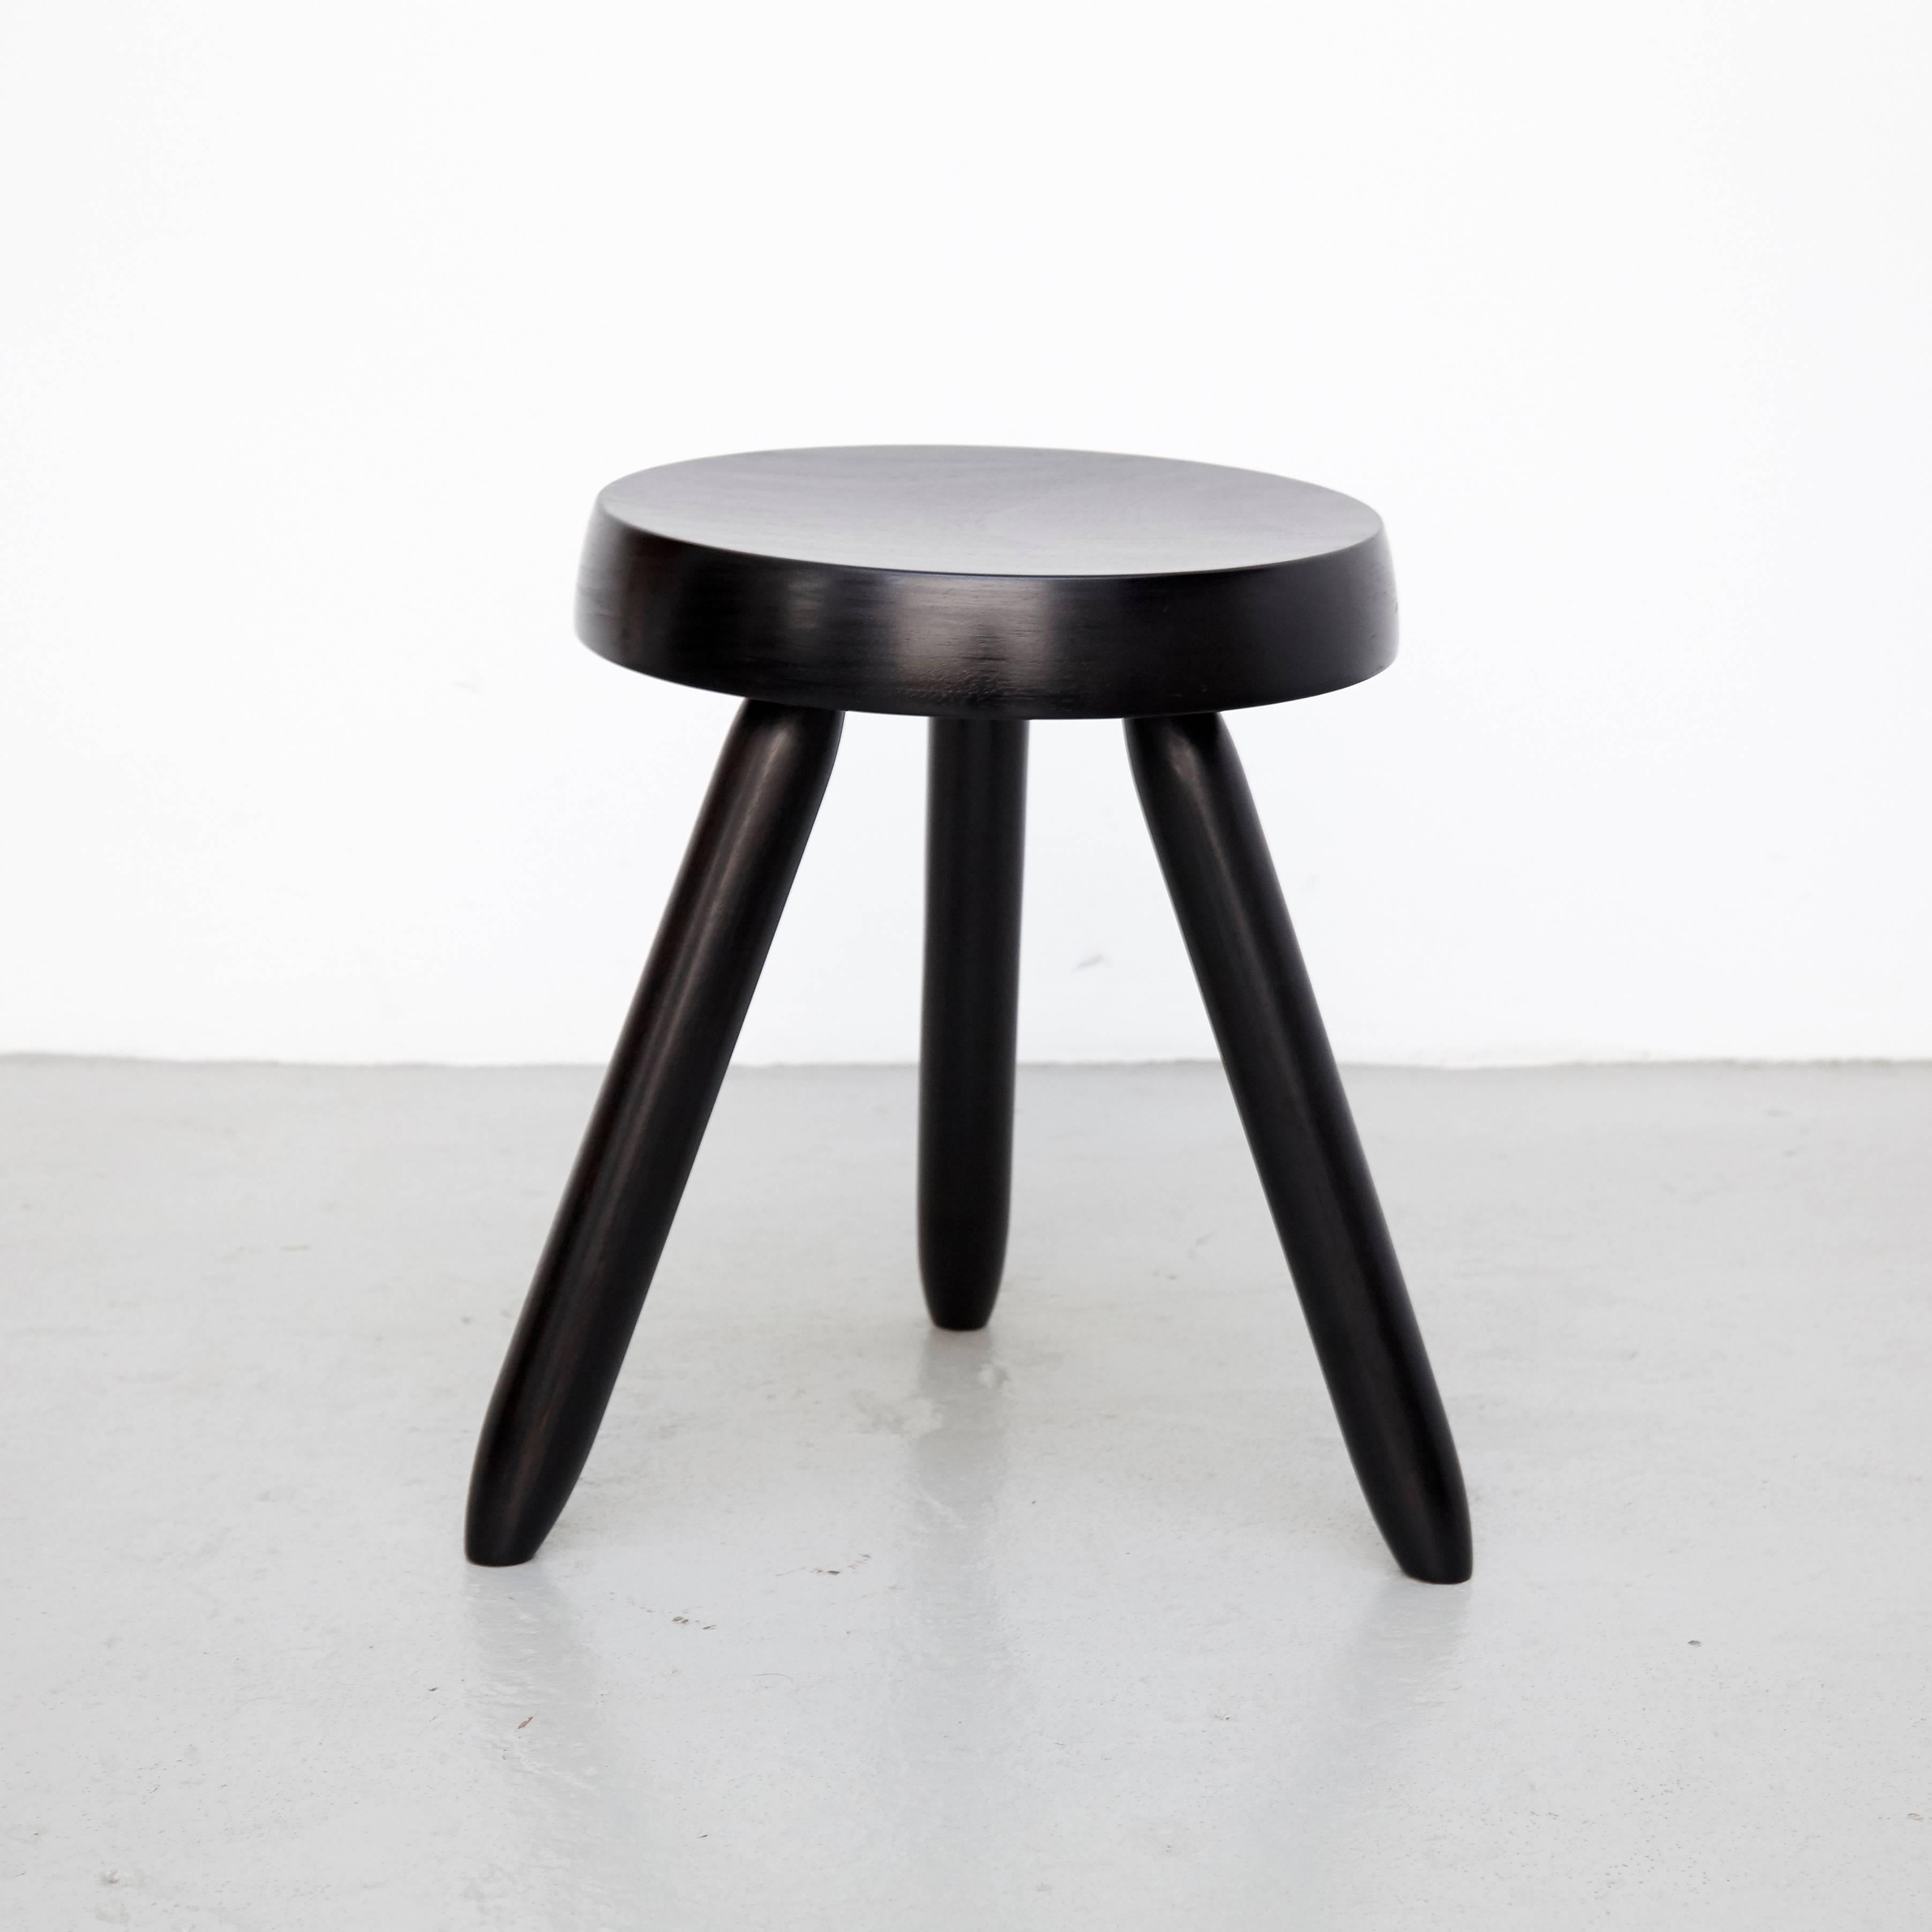 Wood Set of Three Stools in the Style of Charlotte Perriand